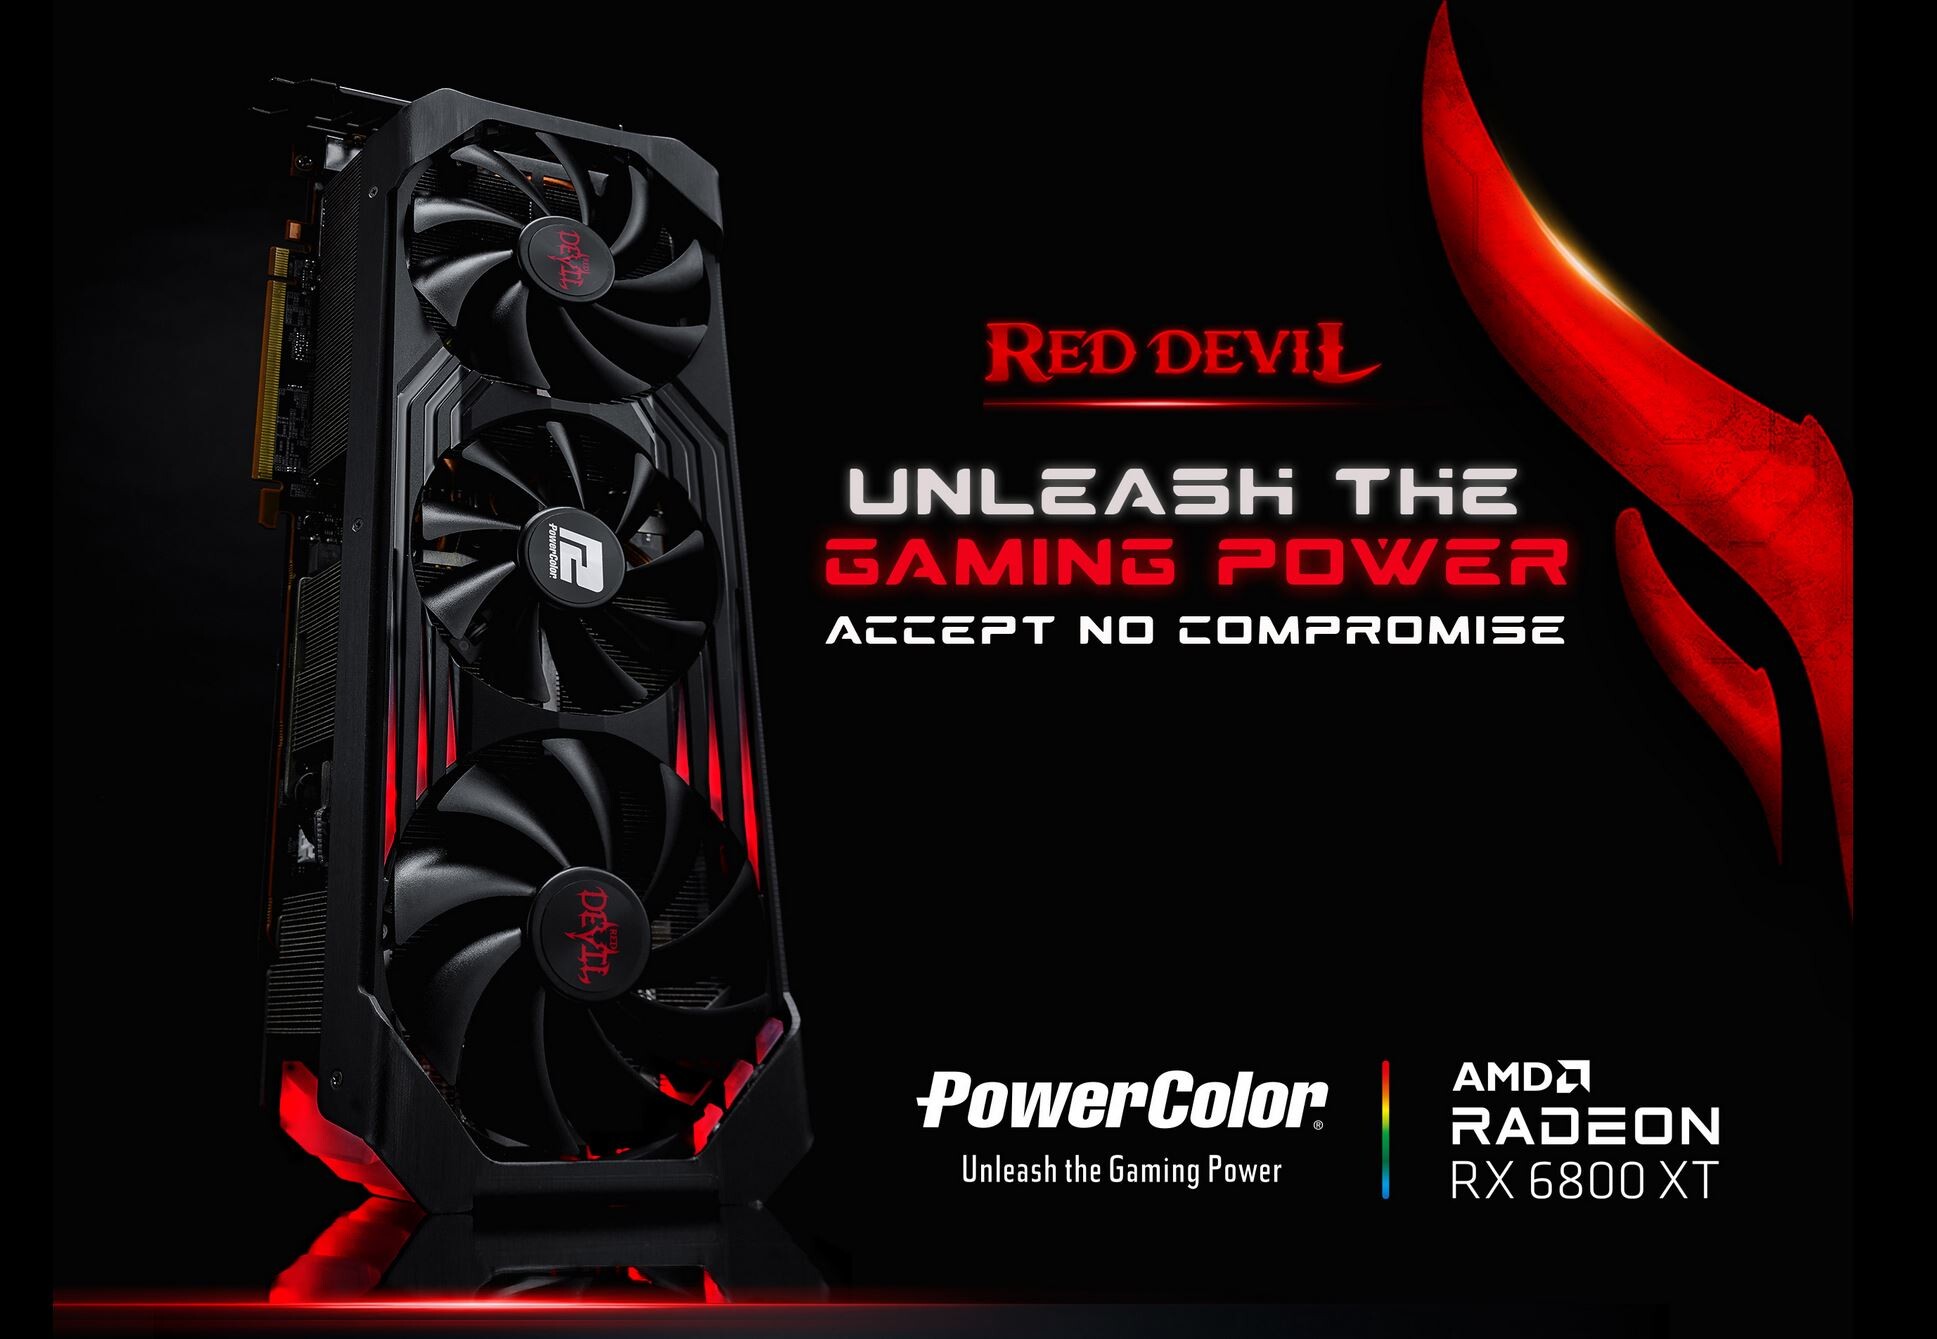 PowerColor Radeon RX 6800 XT Red Devil tested 